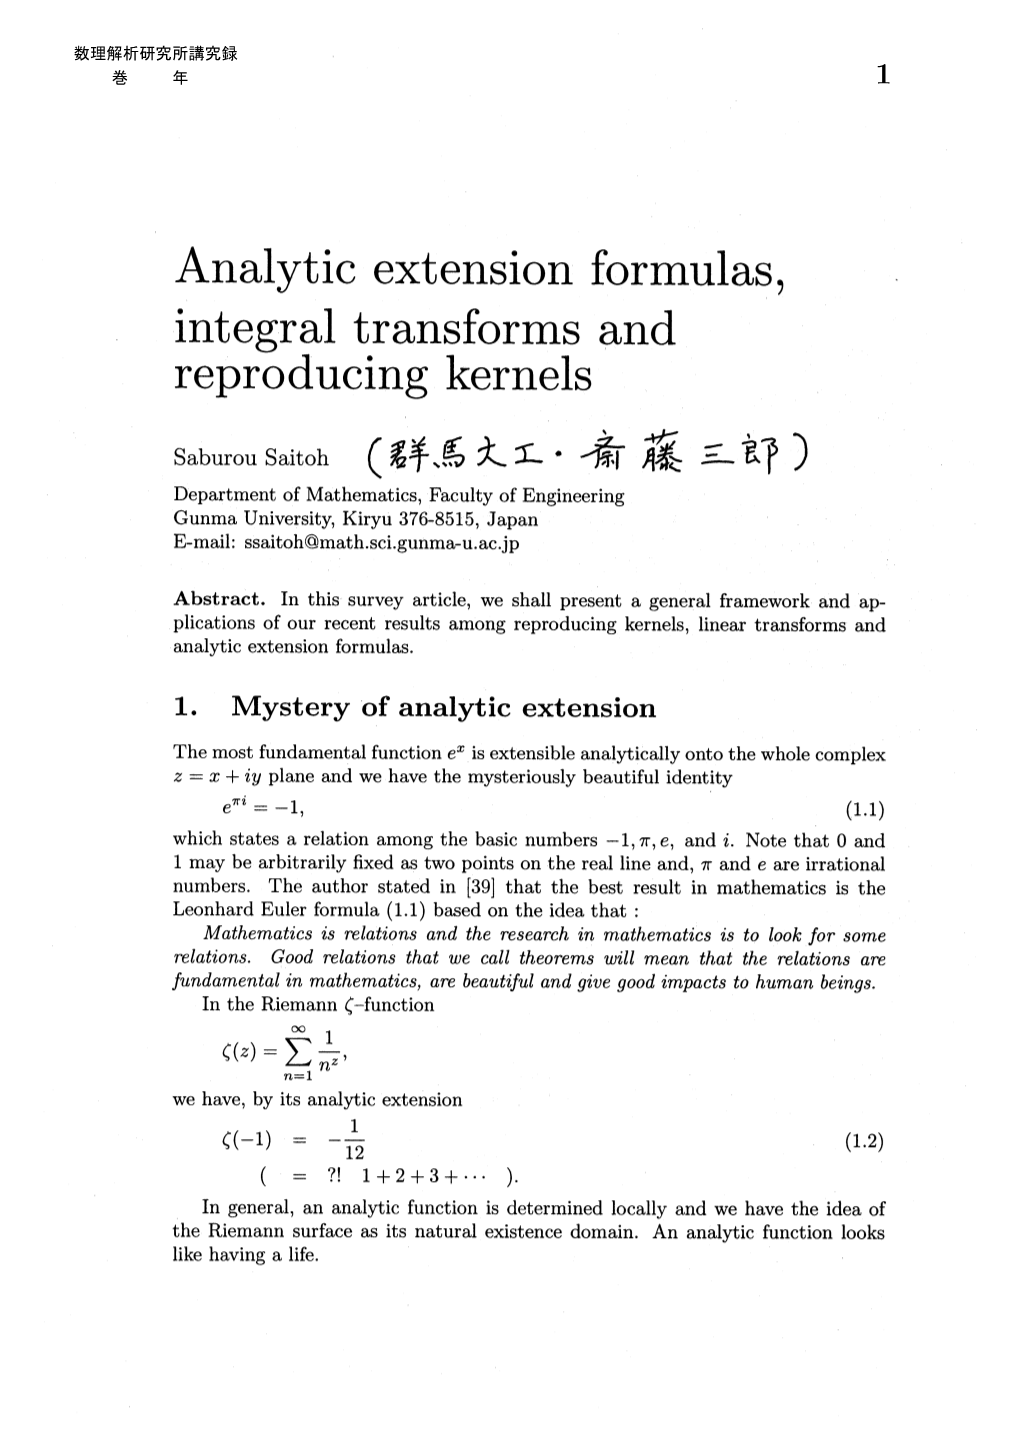 Analytic Extension Formulas, Integral Transforms and Reproducing Kernels